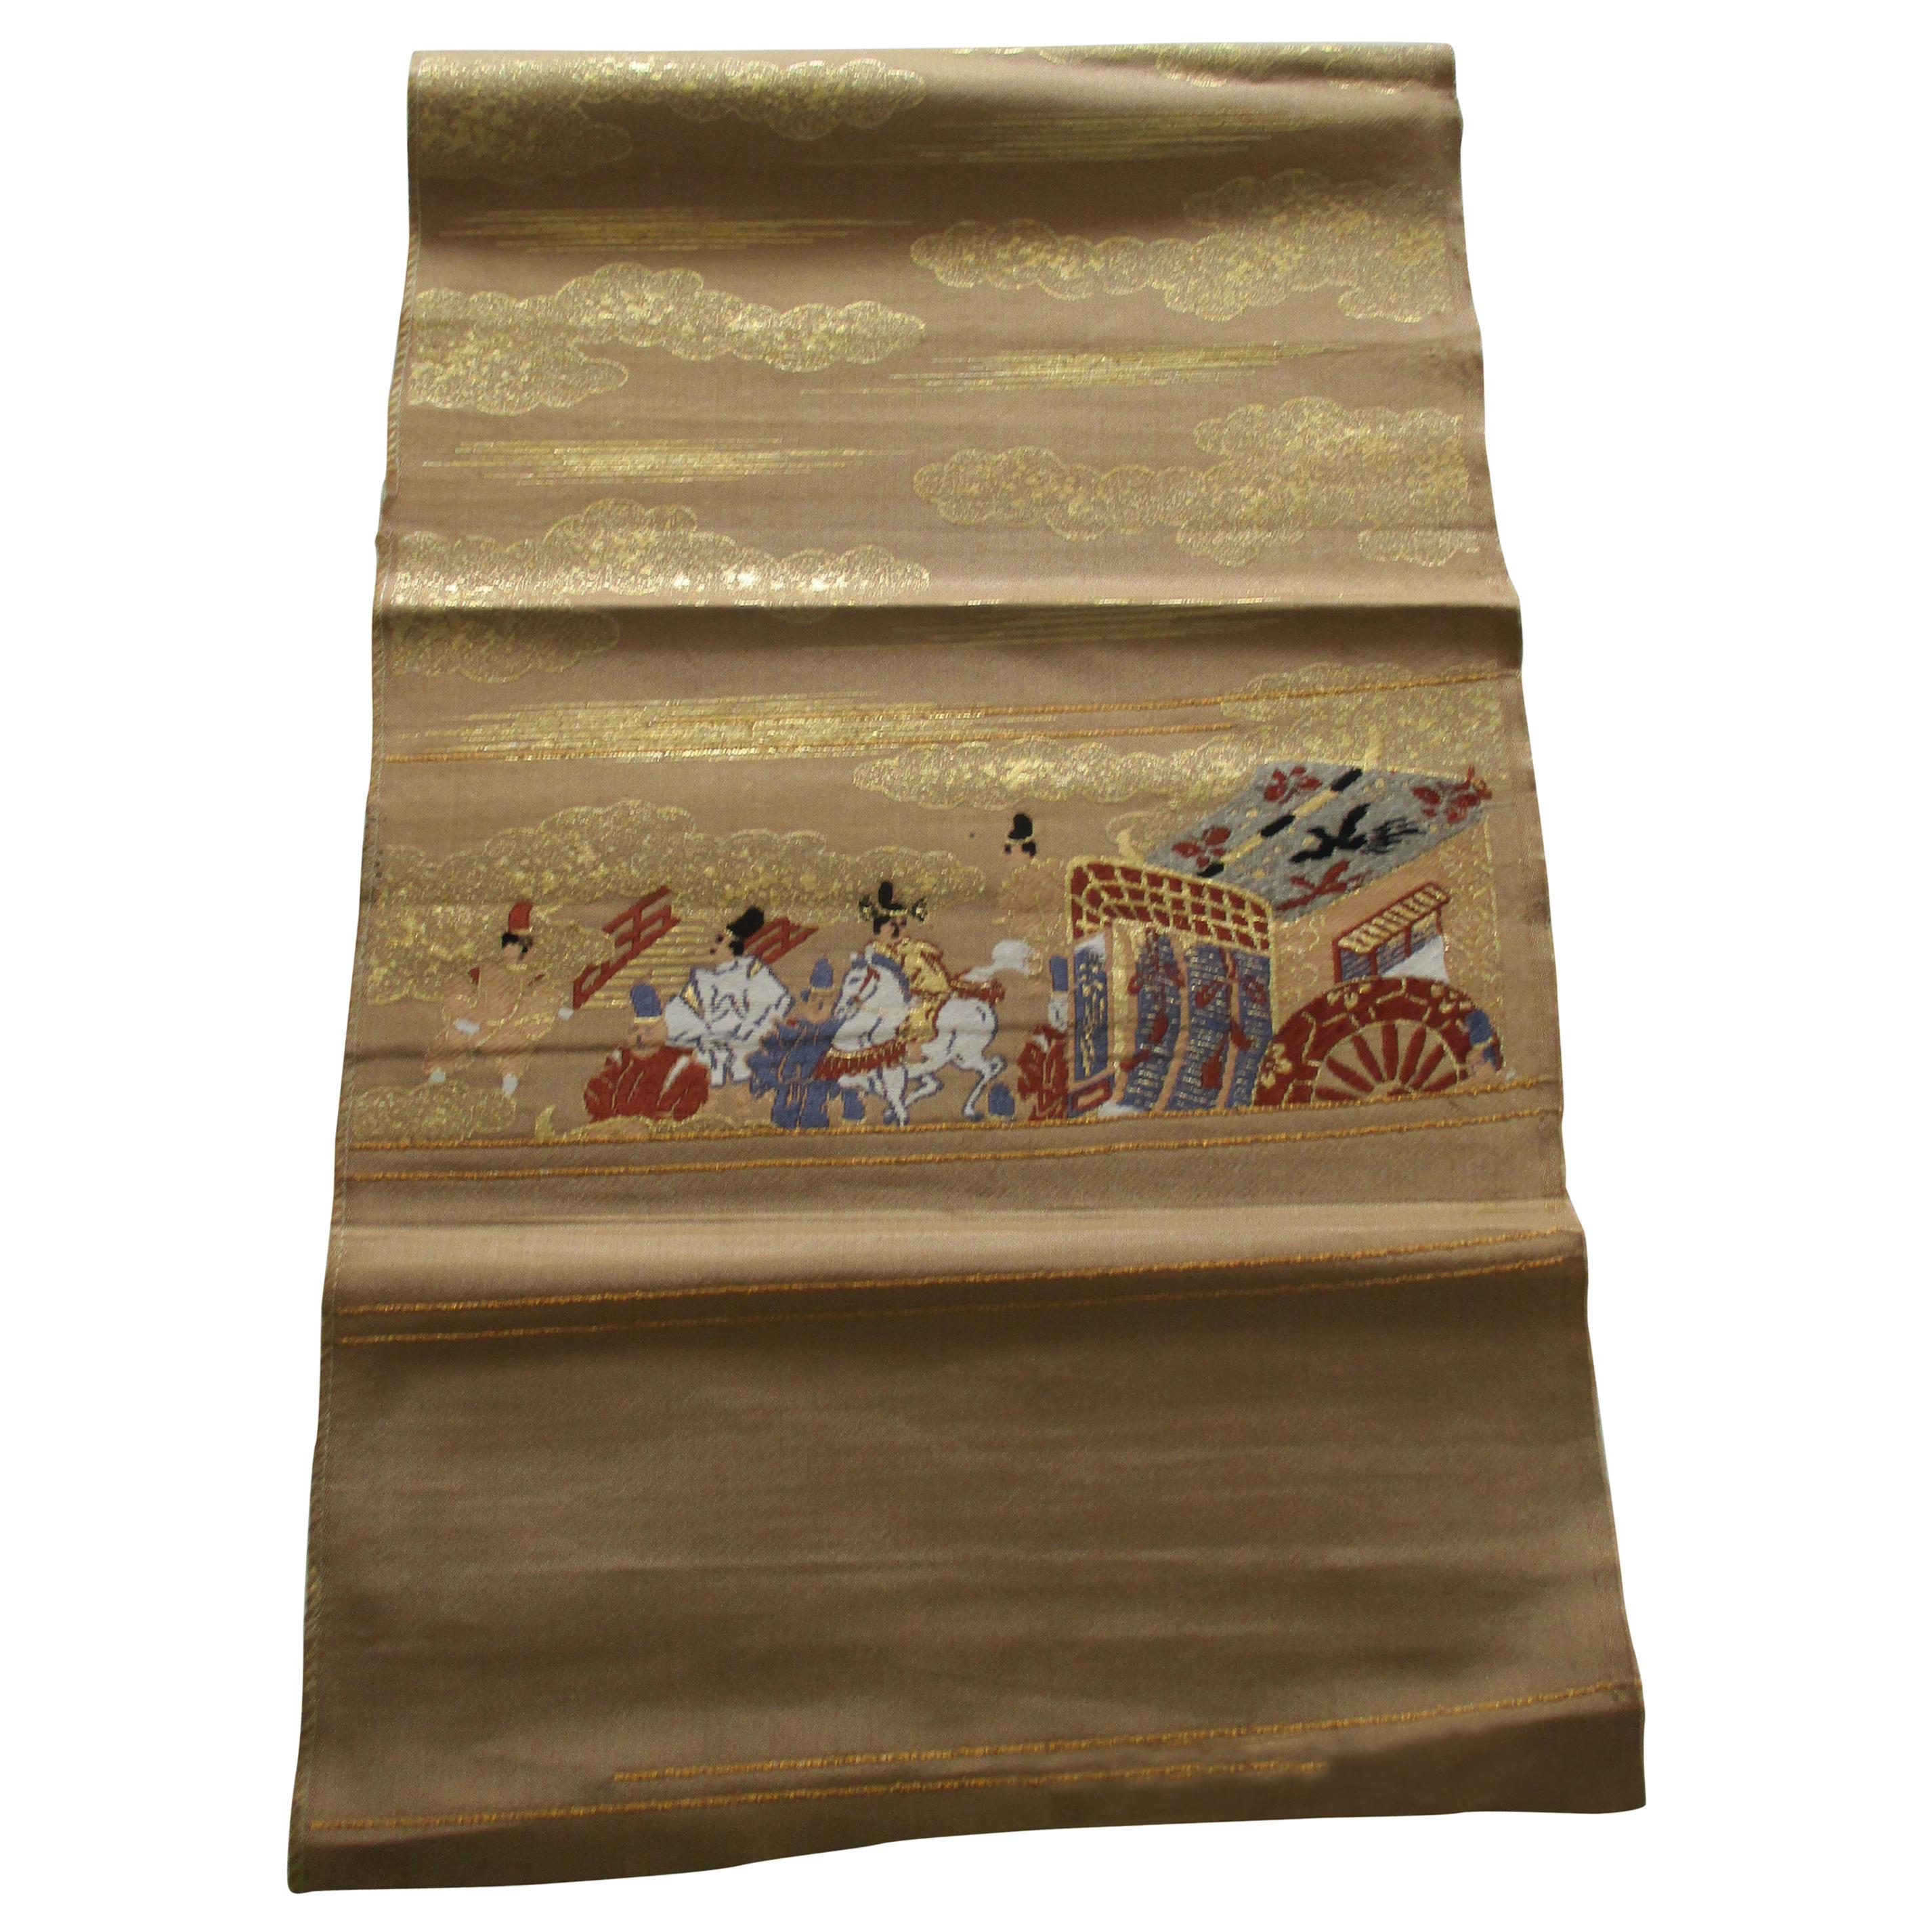 Gold Obi Textile with Street Scene with Chariot For Sale